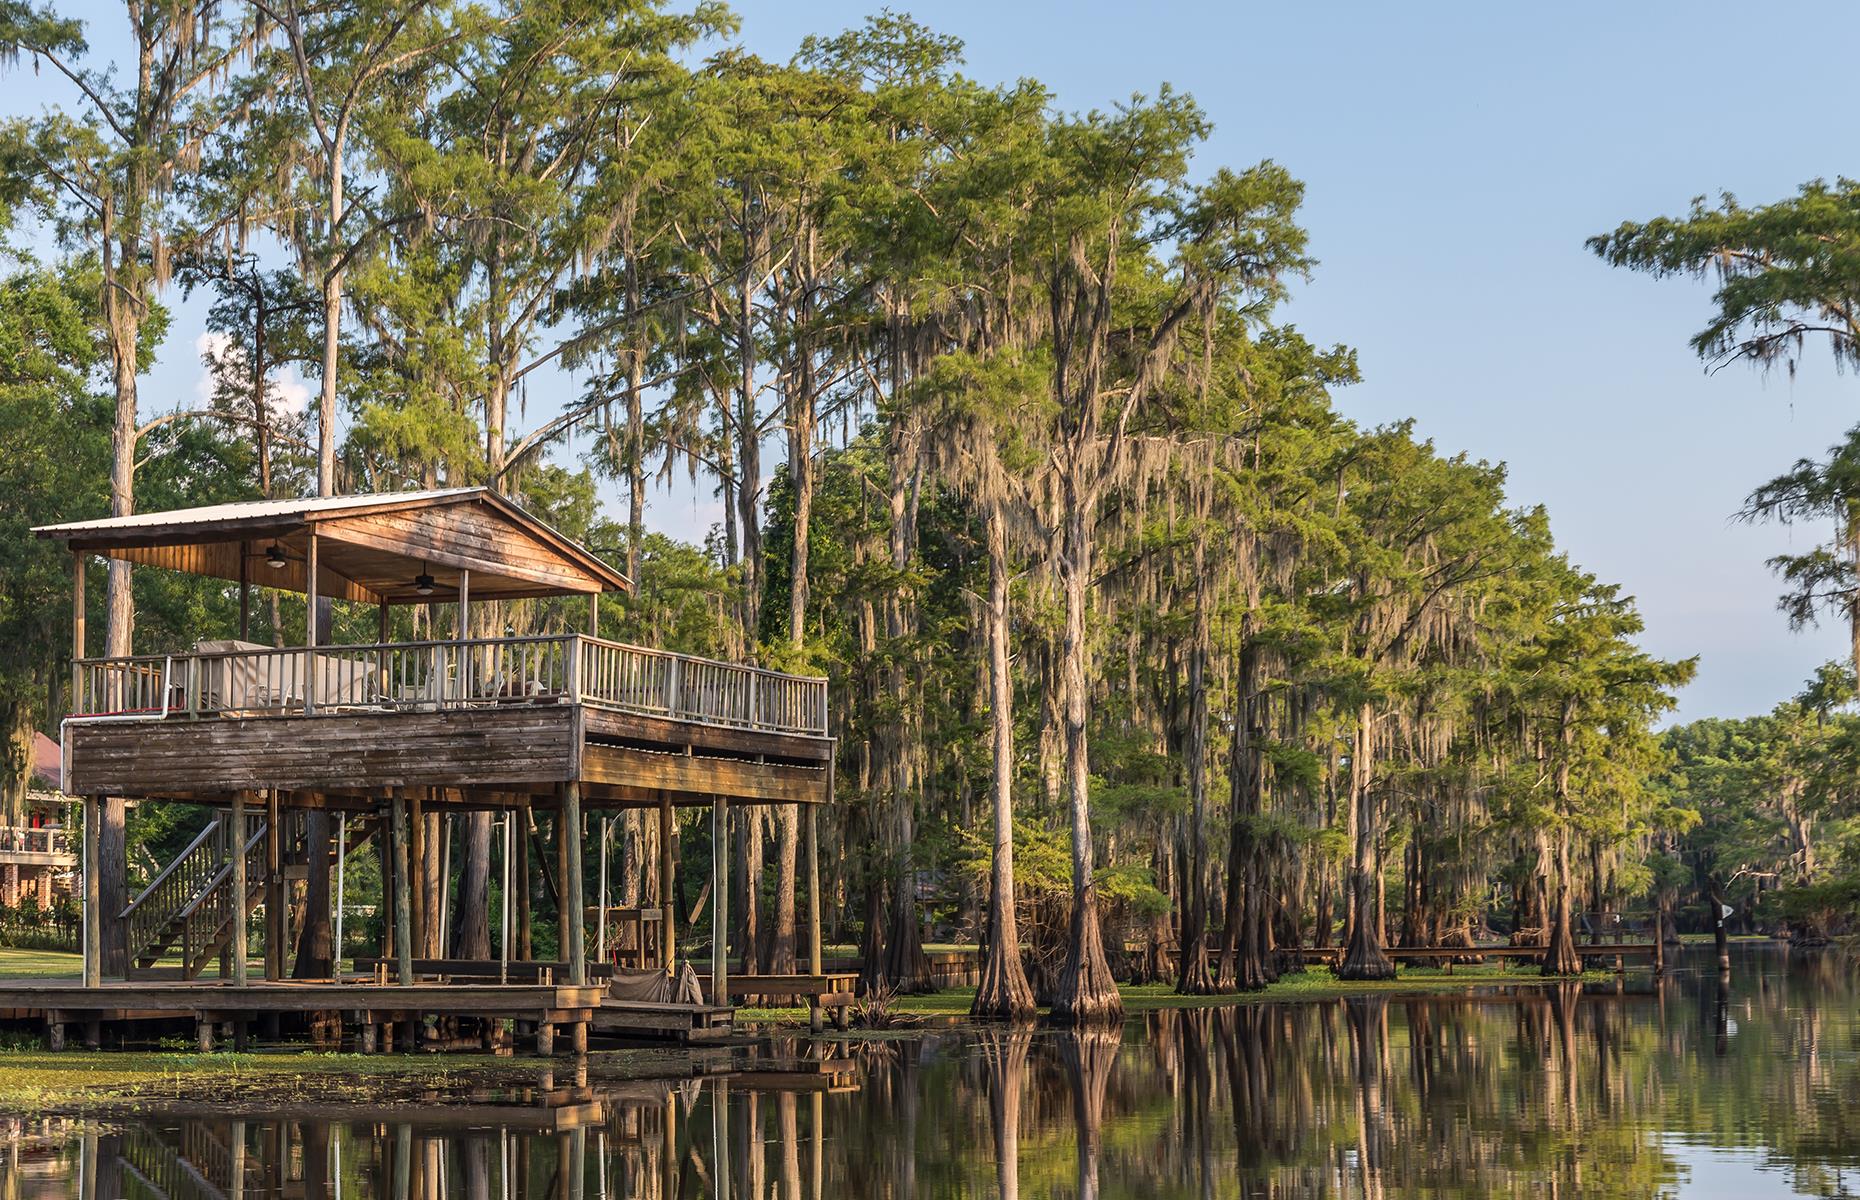 <p>This tucked-away Texan escape hugs the state’s border with Louisiana. The Caddo Lake area is an ethereal mix of swampy bayous, ponds and cypress trees, which rise from the water and drip with Spanish moss. People (though not too many – don’t worry) come here to fish from the pier, paddle around the maze of waterways or just rent one of the park’s cabins.</p>  <p><strong><a href="https://www.loveexploring.com/galleries/90563/americas-most-stunning-natural-wonders?page=1">Now check out more of America's most stunning natural wonders</a></strong></p>